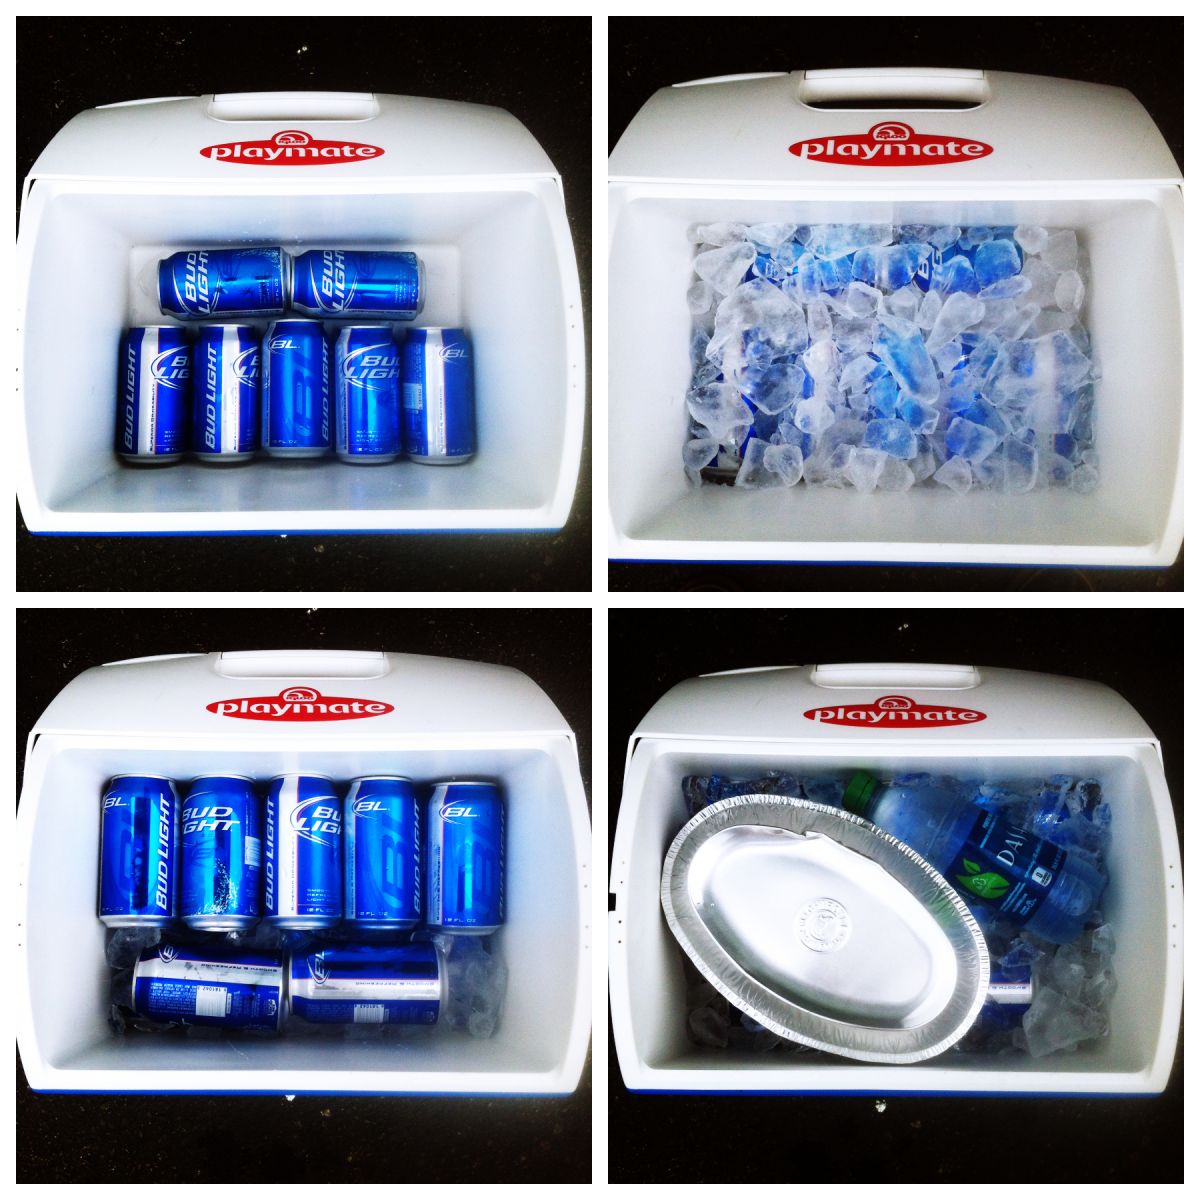 Igloo Playmate Cooler, How to pack a cooler